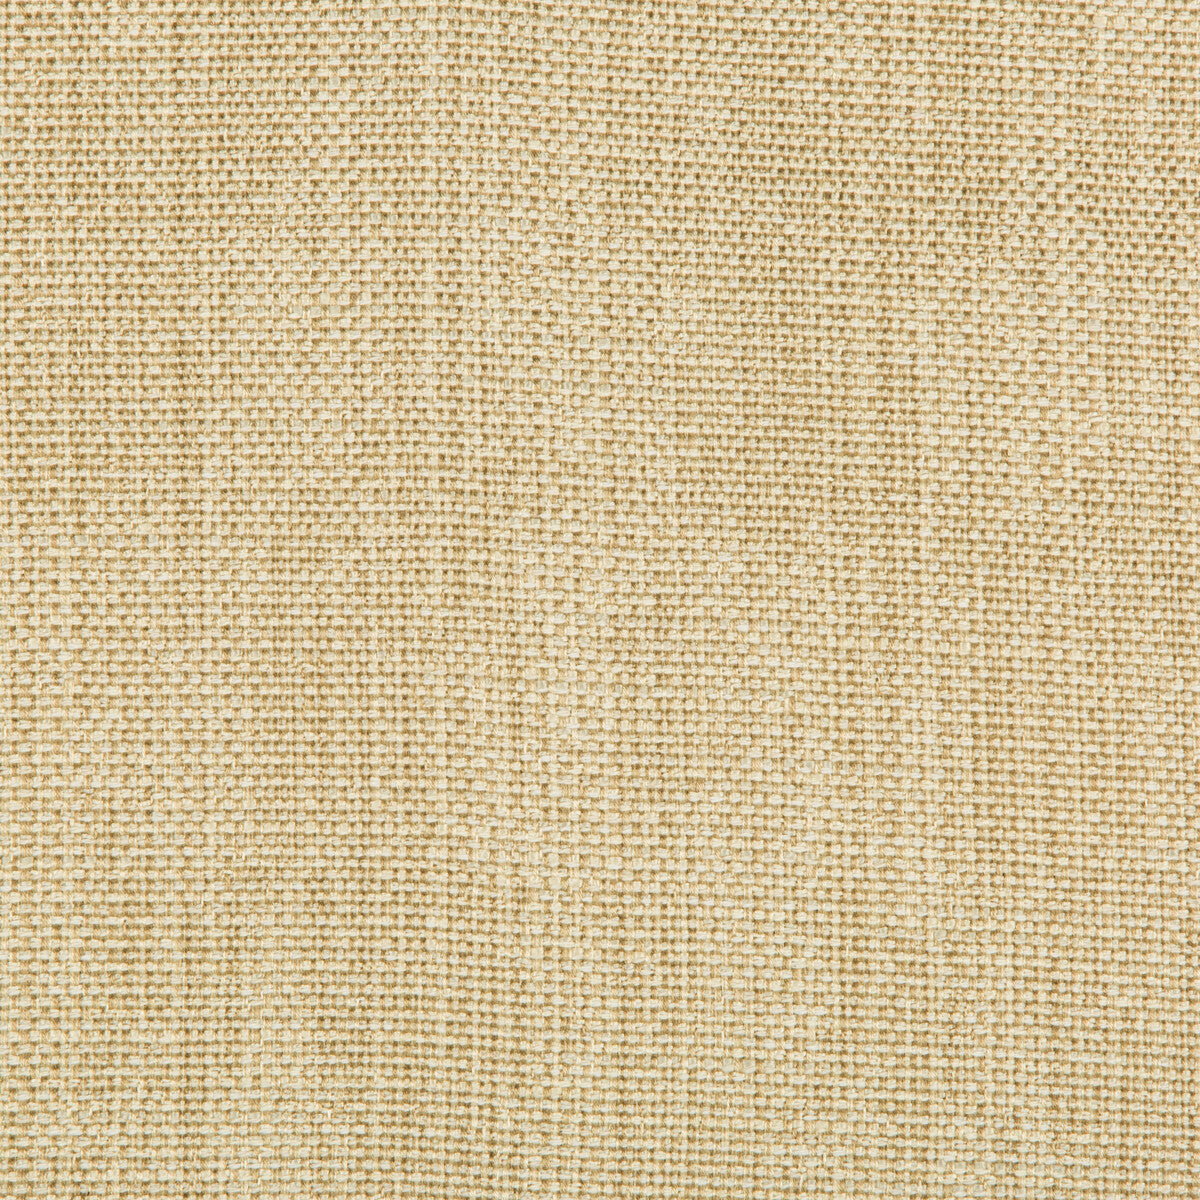 Kravet Design fabric in 35135-4 color - pattern 35135.4.0 - by Kravet Design in the Performance Crypton Home collection